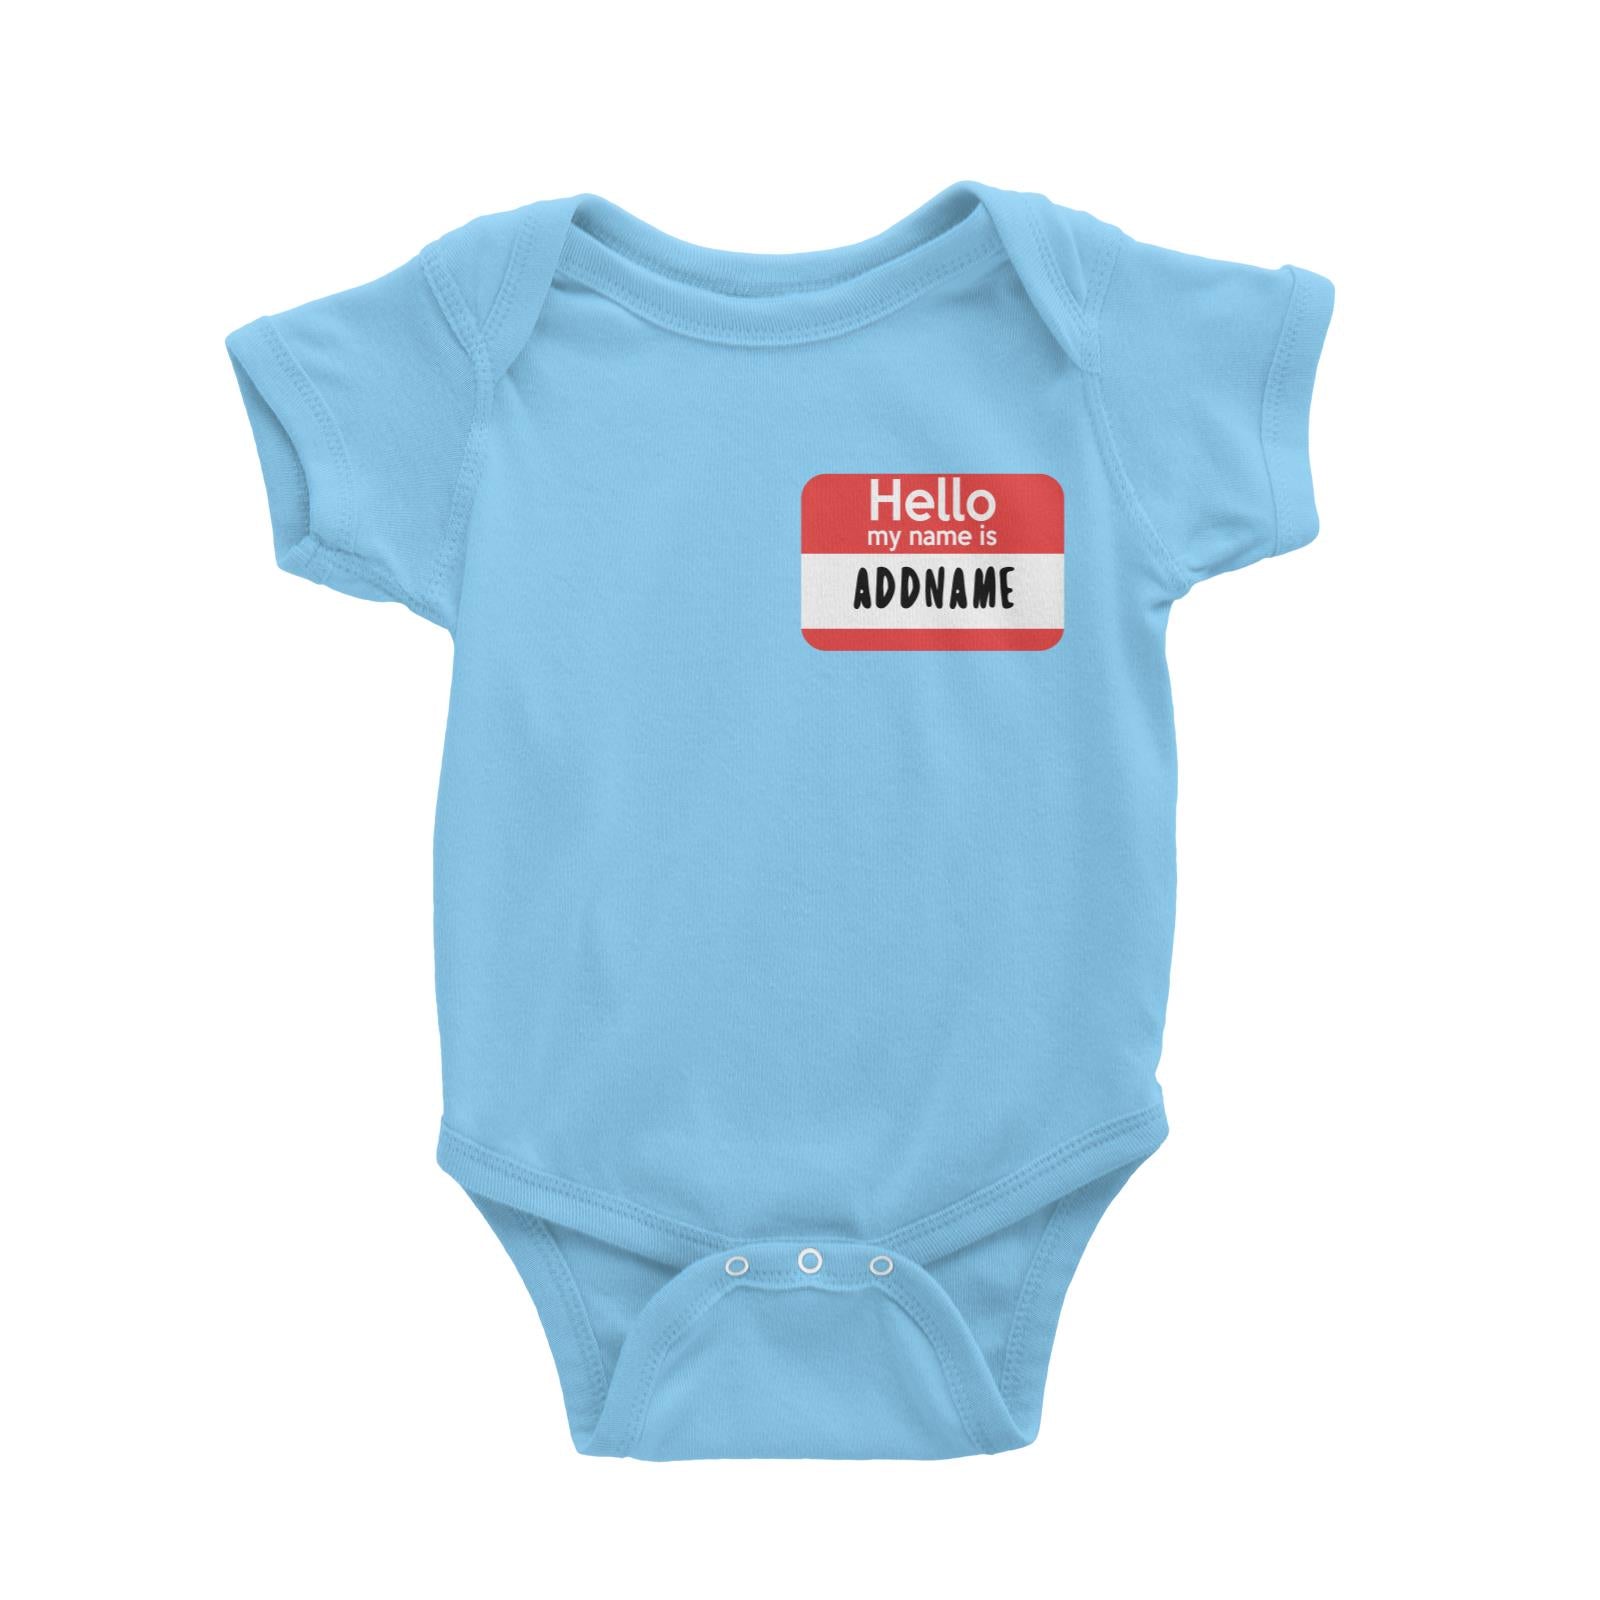 Hello My Name is Addname in Red Tag Baby Romper Personalizable Designs Basic Newborn